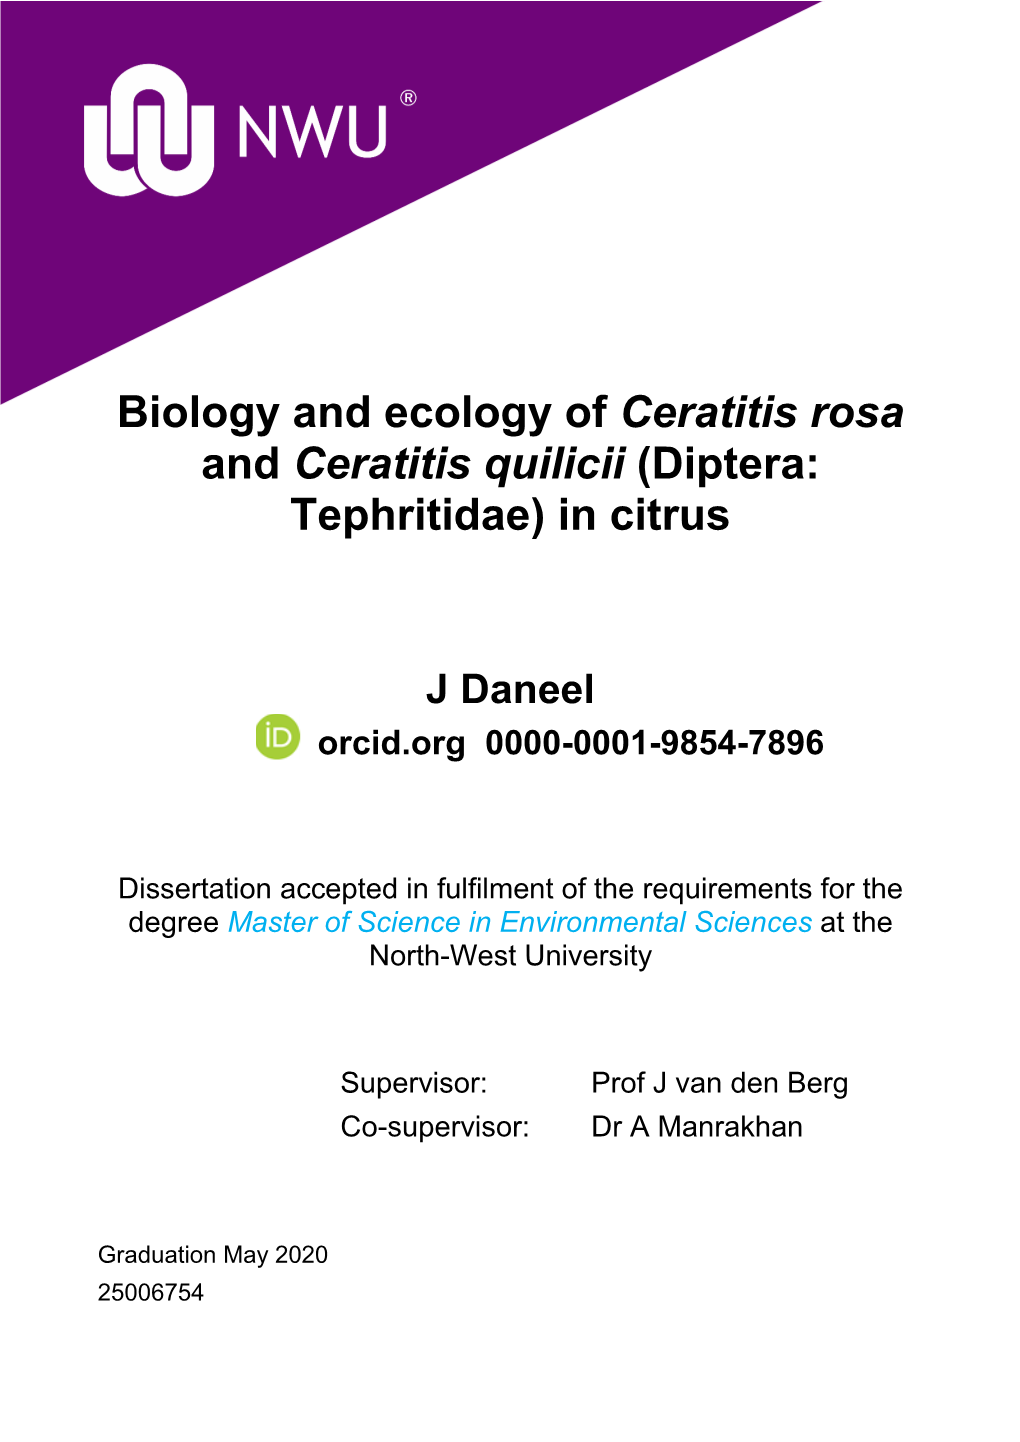 Biology and Ecology of Ceratitis Rosa and Ceratitis Quilicii (Diptera: Tephritidae) in Citrus